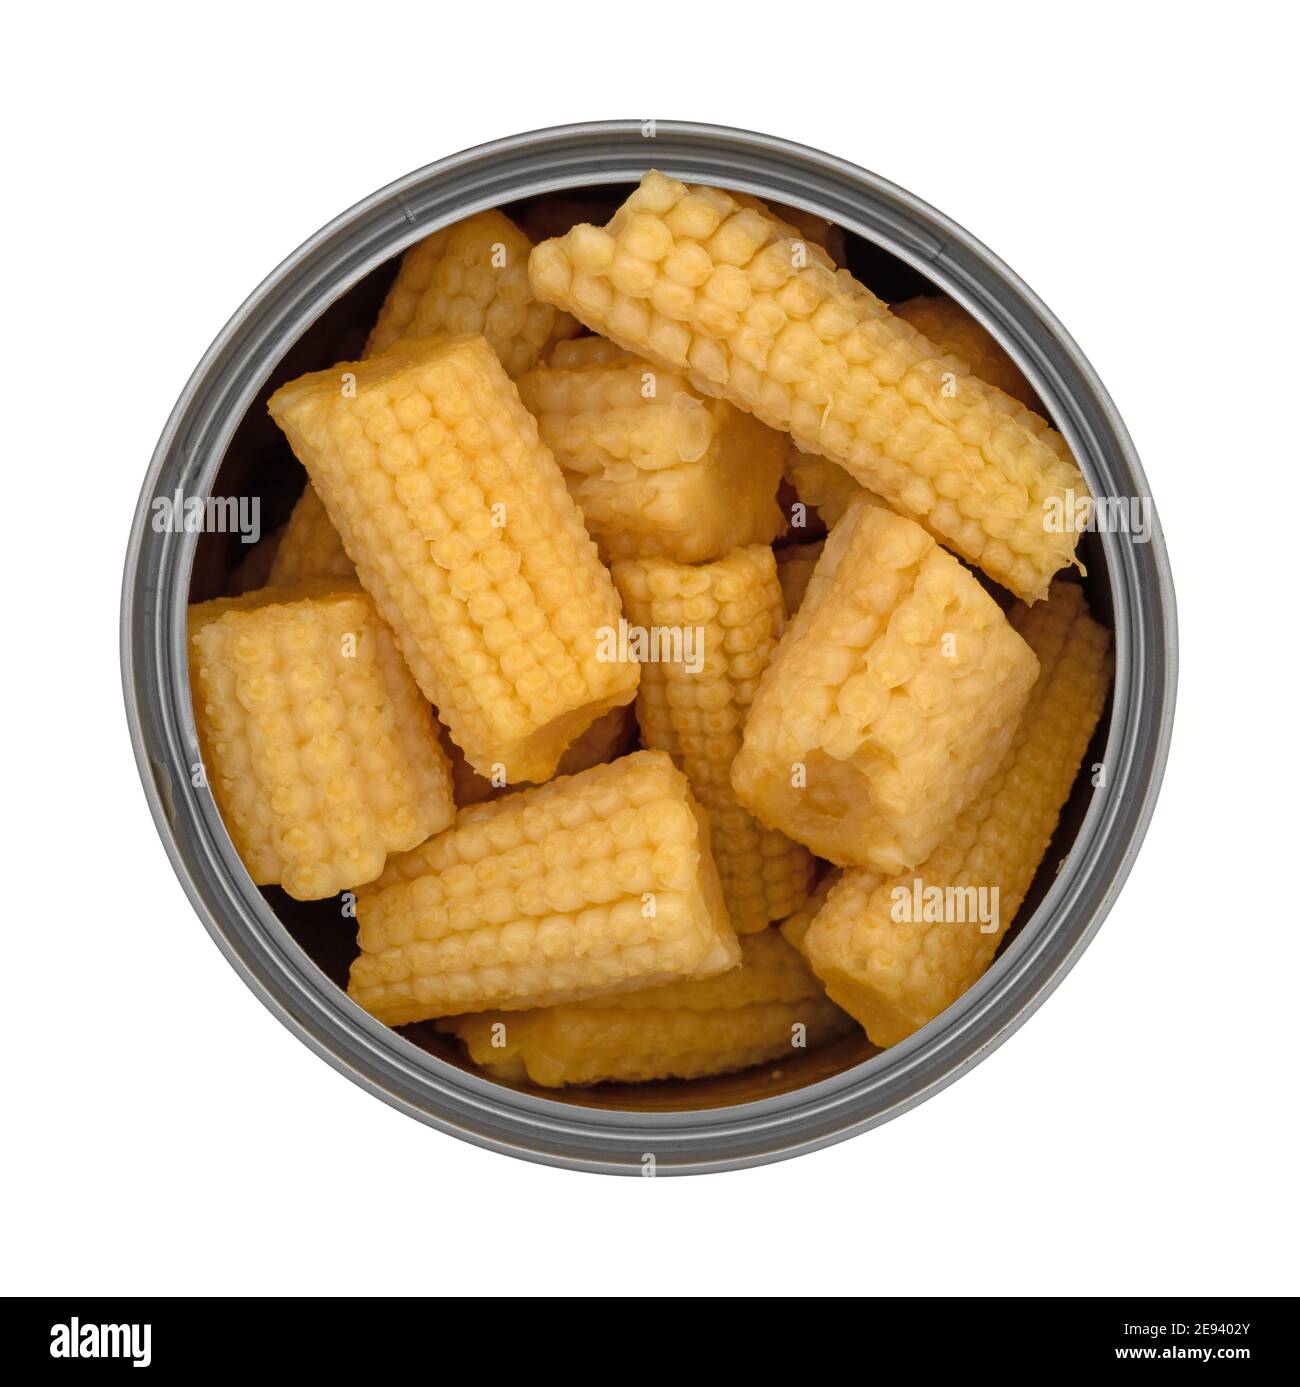 Overhead view of an open can filled with organic baby corn isolated on a white background. Stock Photo